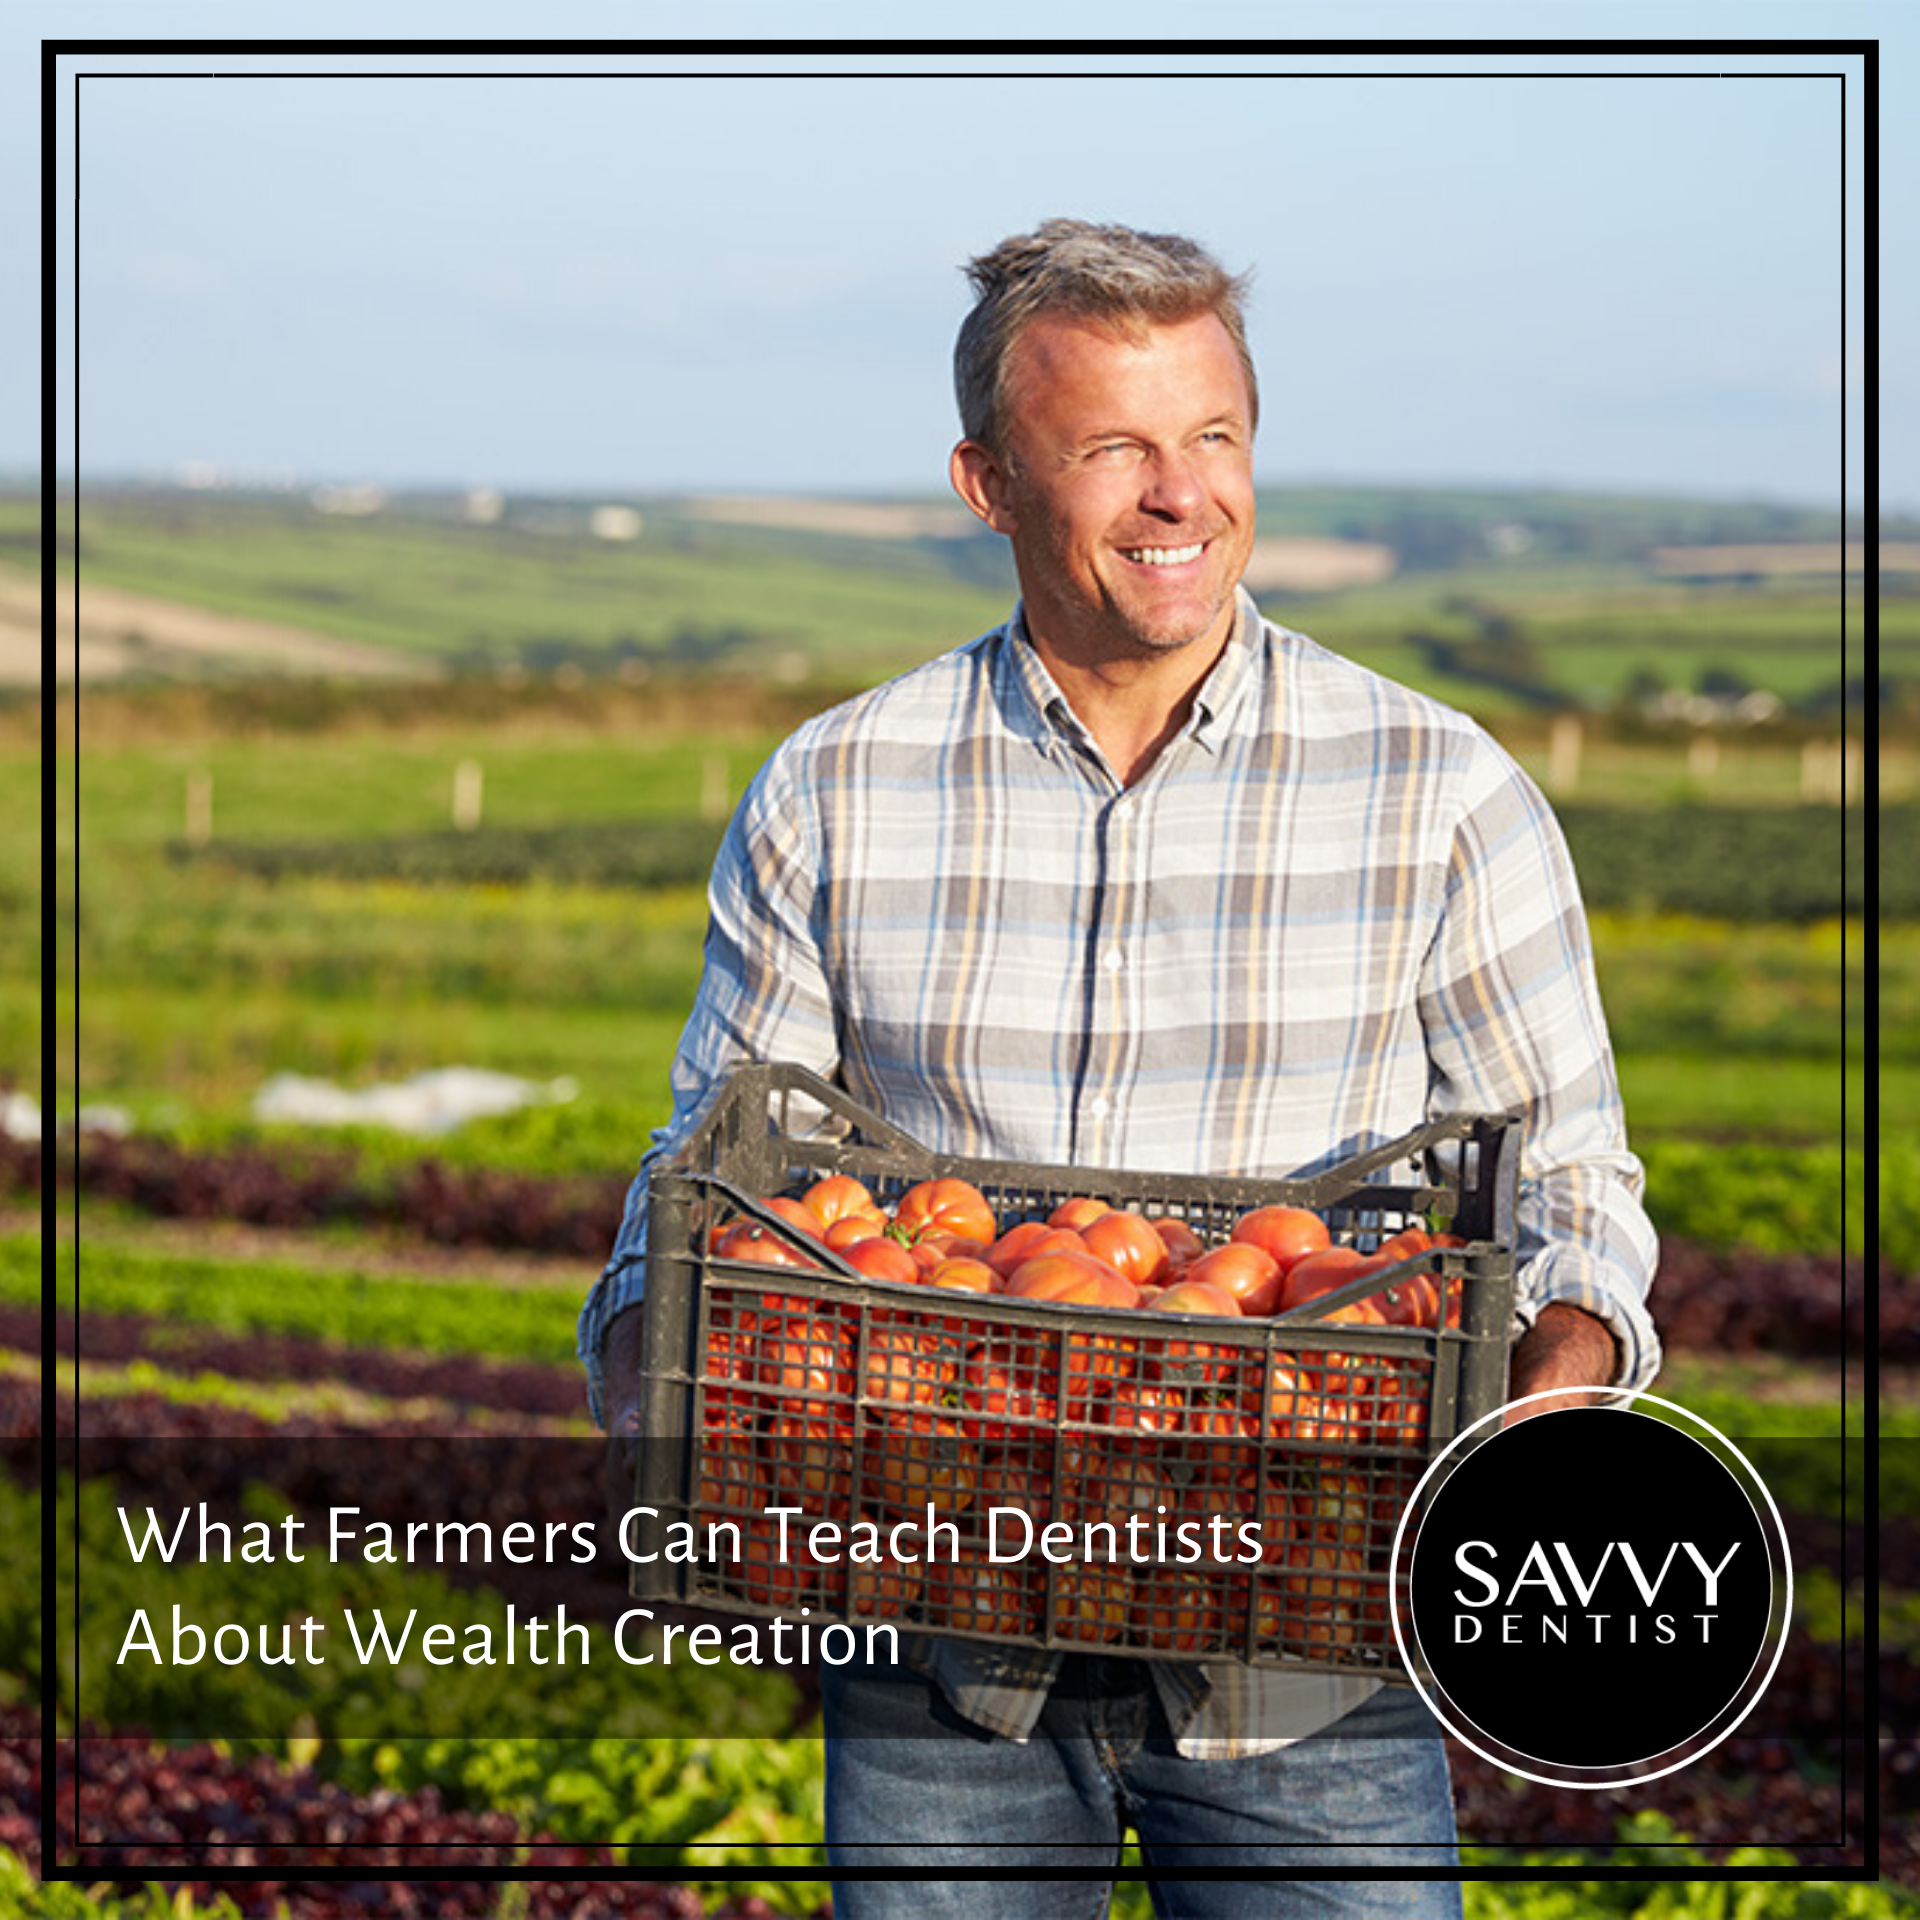 What Farmers Can Teach Dentist About Wealth Creation